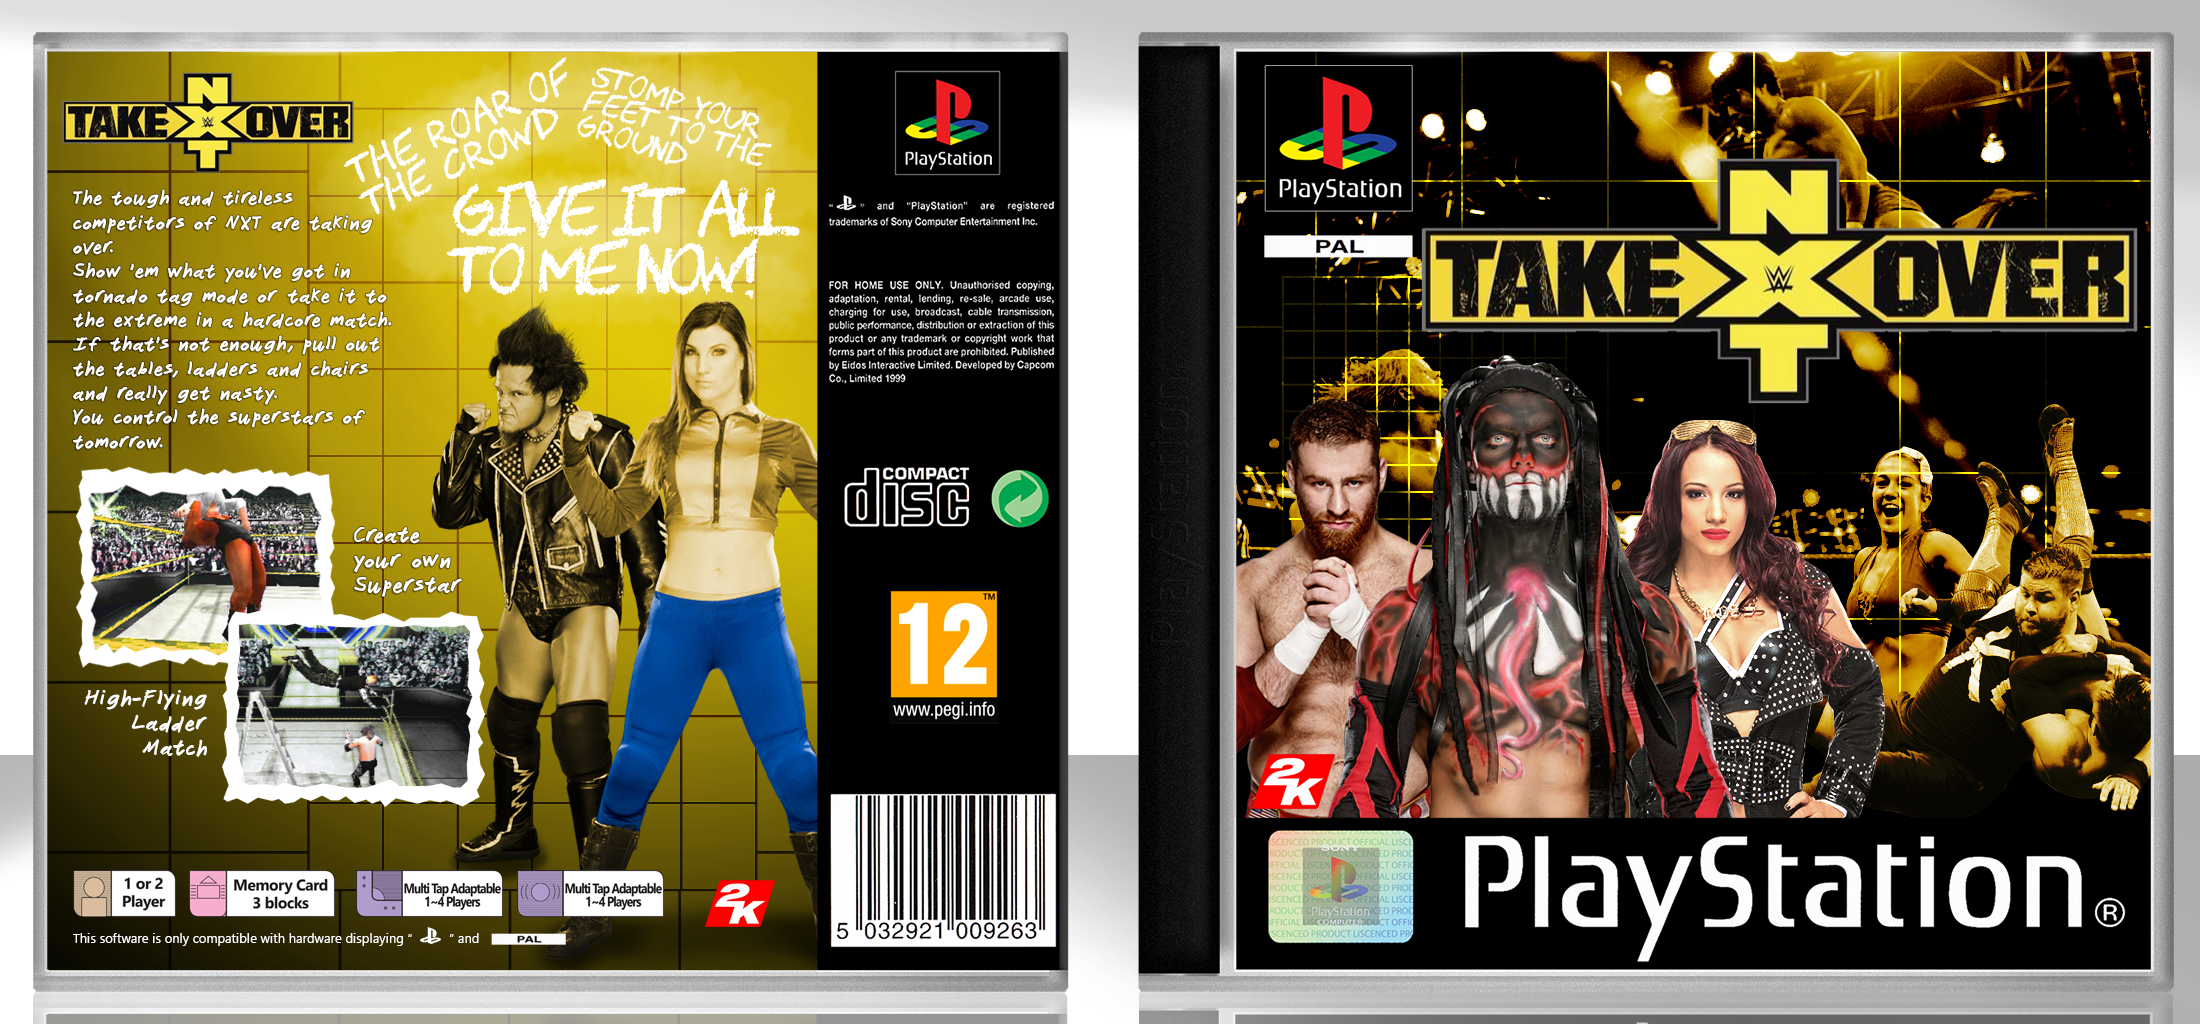 NXT TakeOver box cover